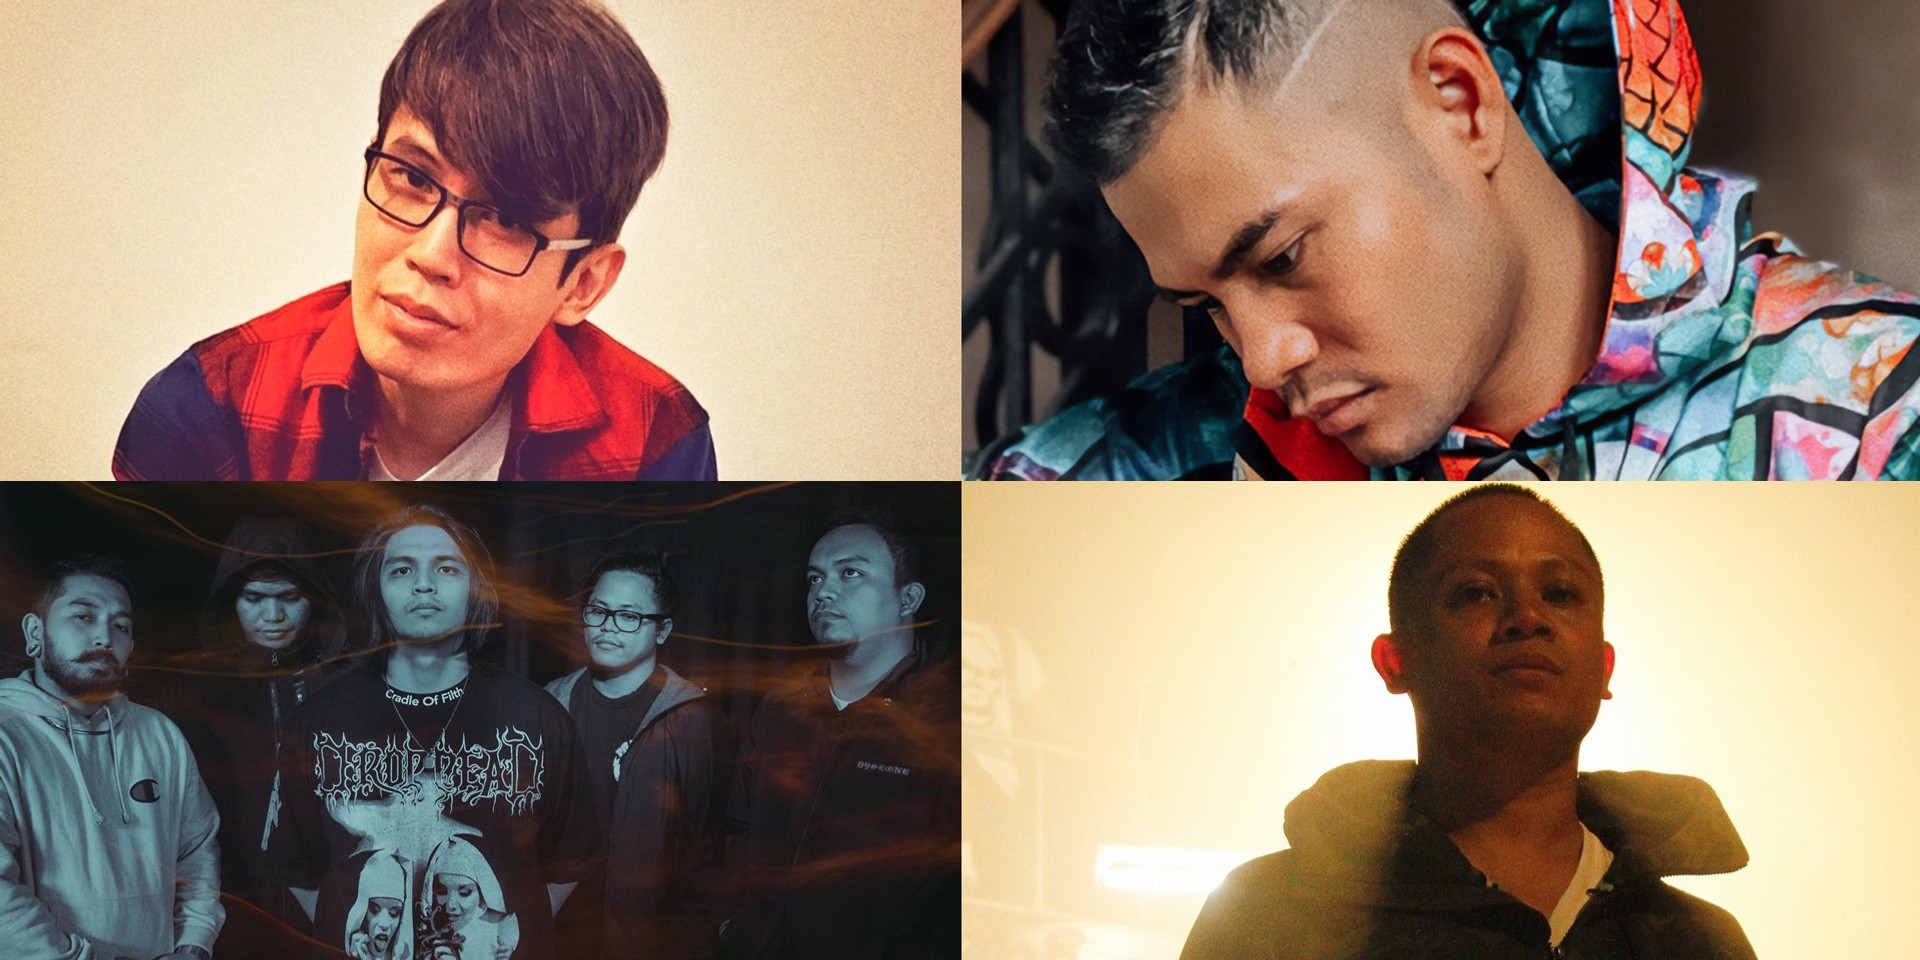 Hannah + Gabi, Mike Swift, Bugoy Drilon, Fragments, and more release new music – listen